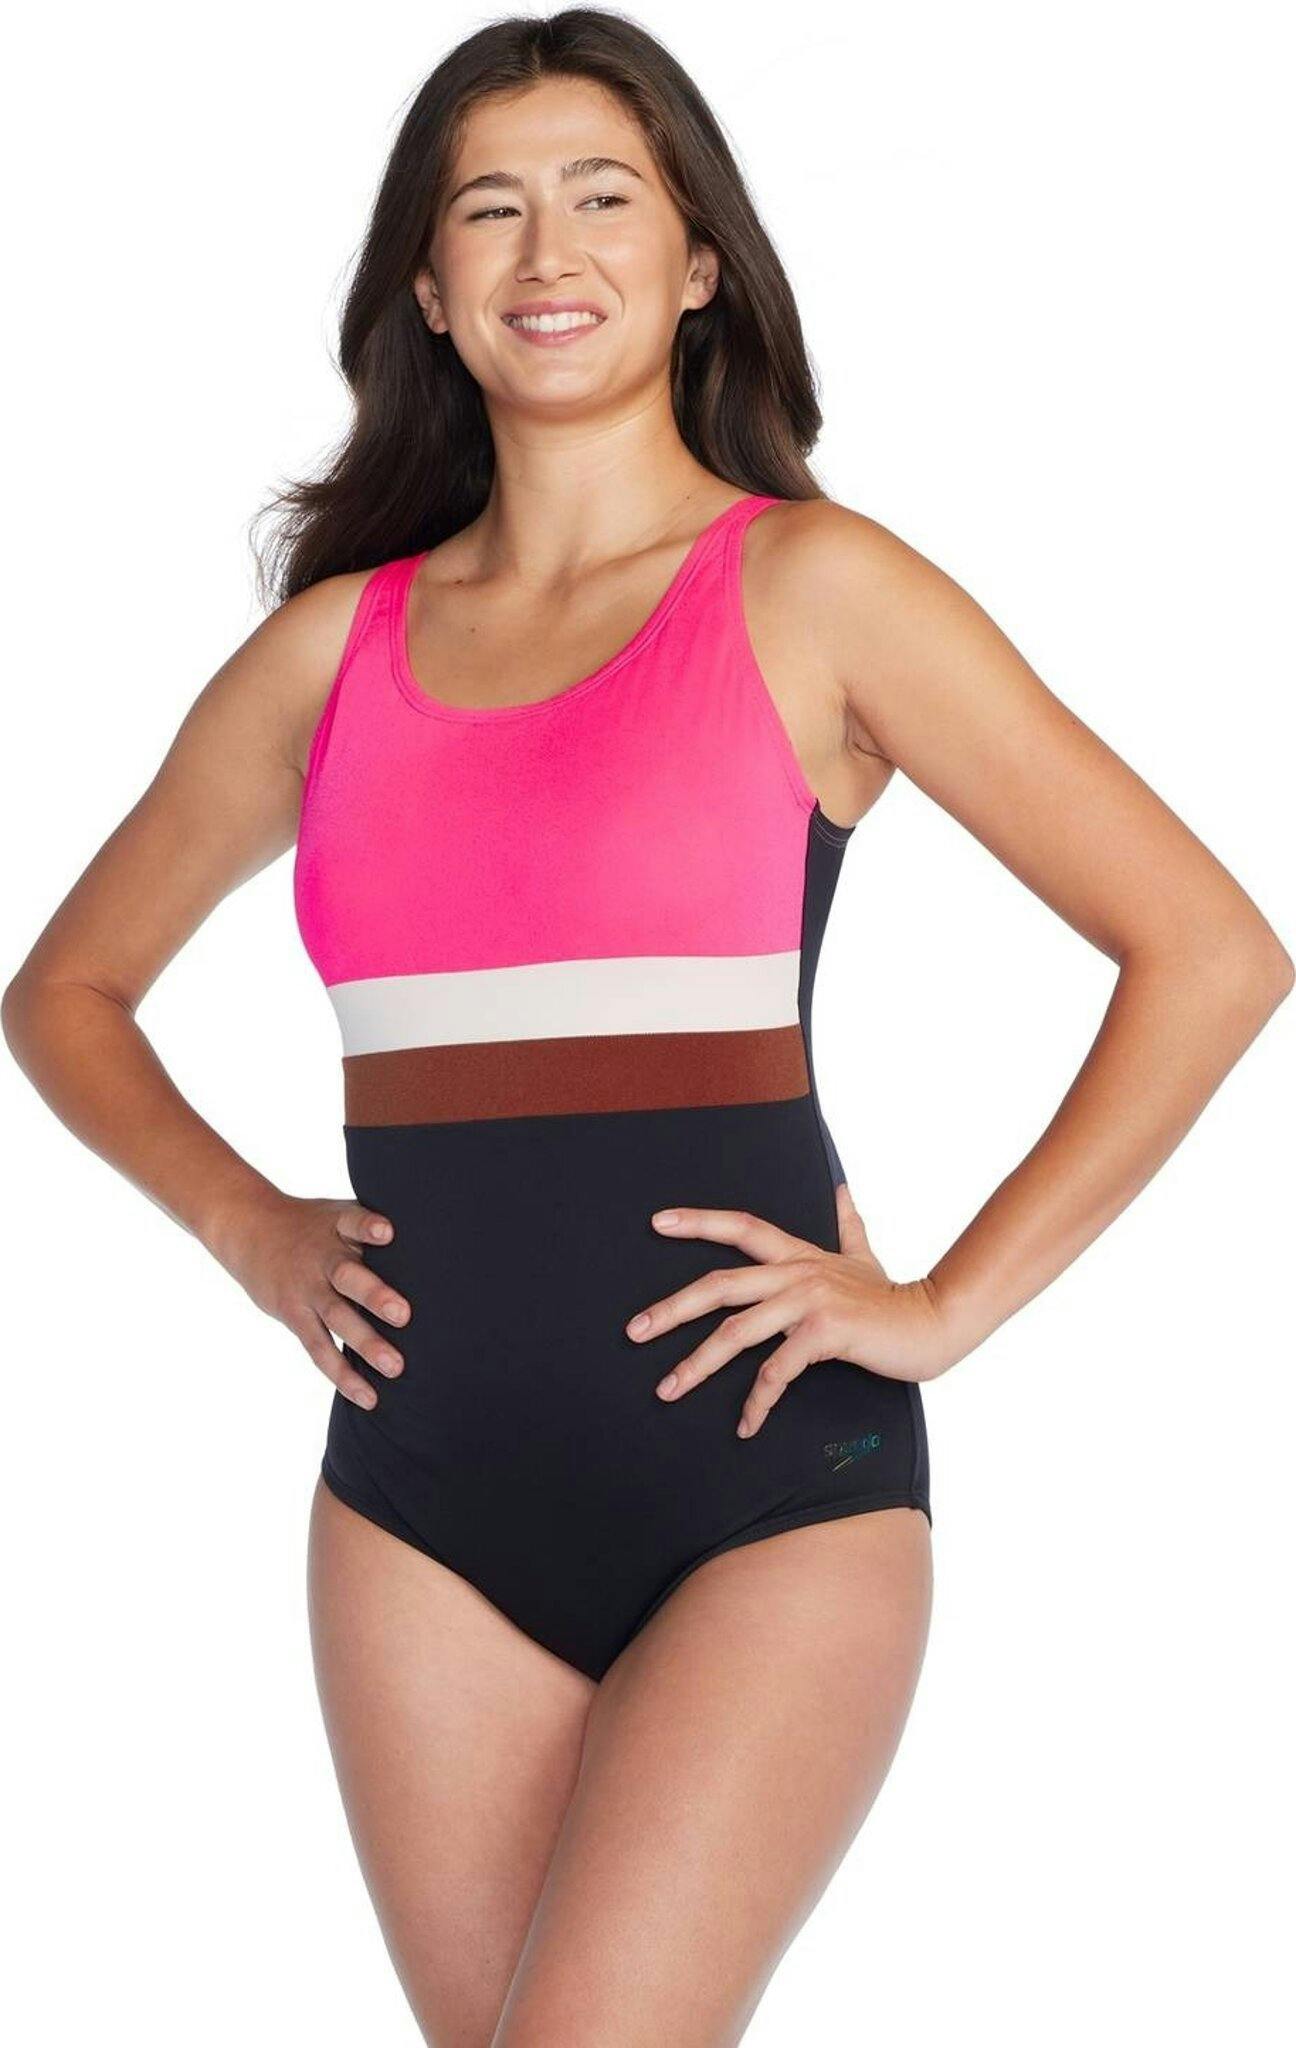 Product image for Banded Colorblock One Piece Swimsuit - Women's